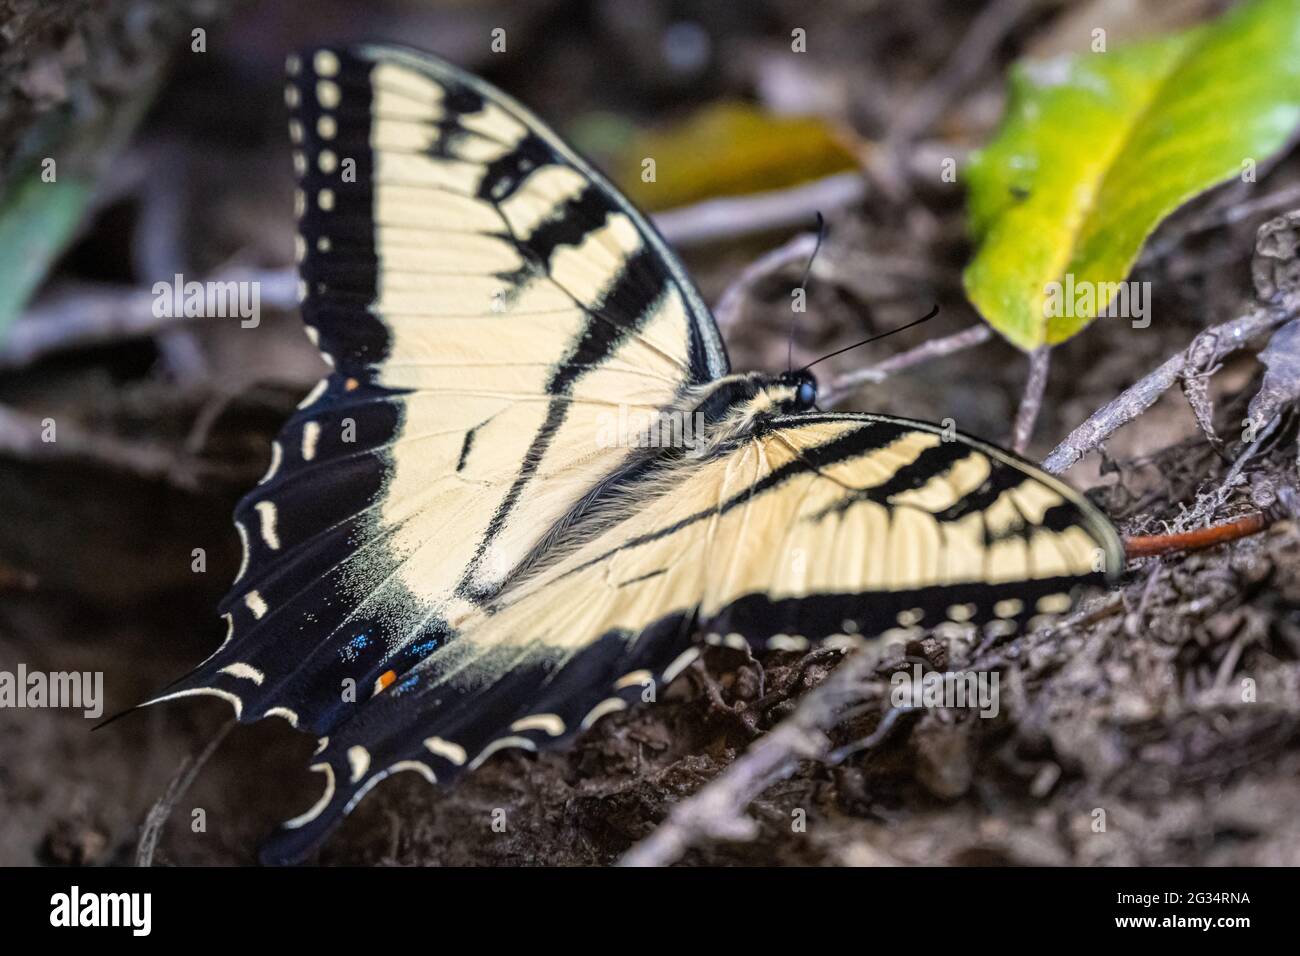 Eastern tiger swallowtail butterfly (Papilio glaucus) alongside the Chattahoochee River in Sandy Springs, Georgia. (USA) Stock Photo